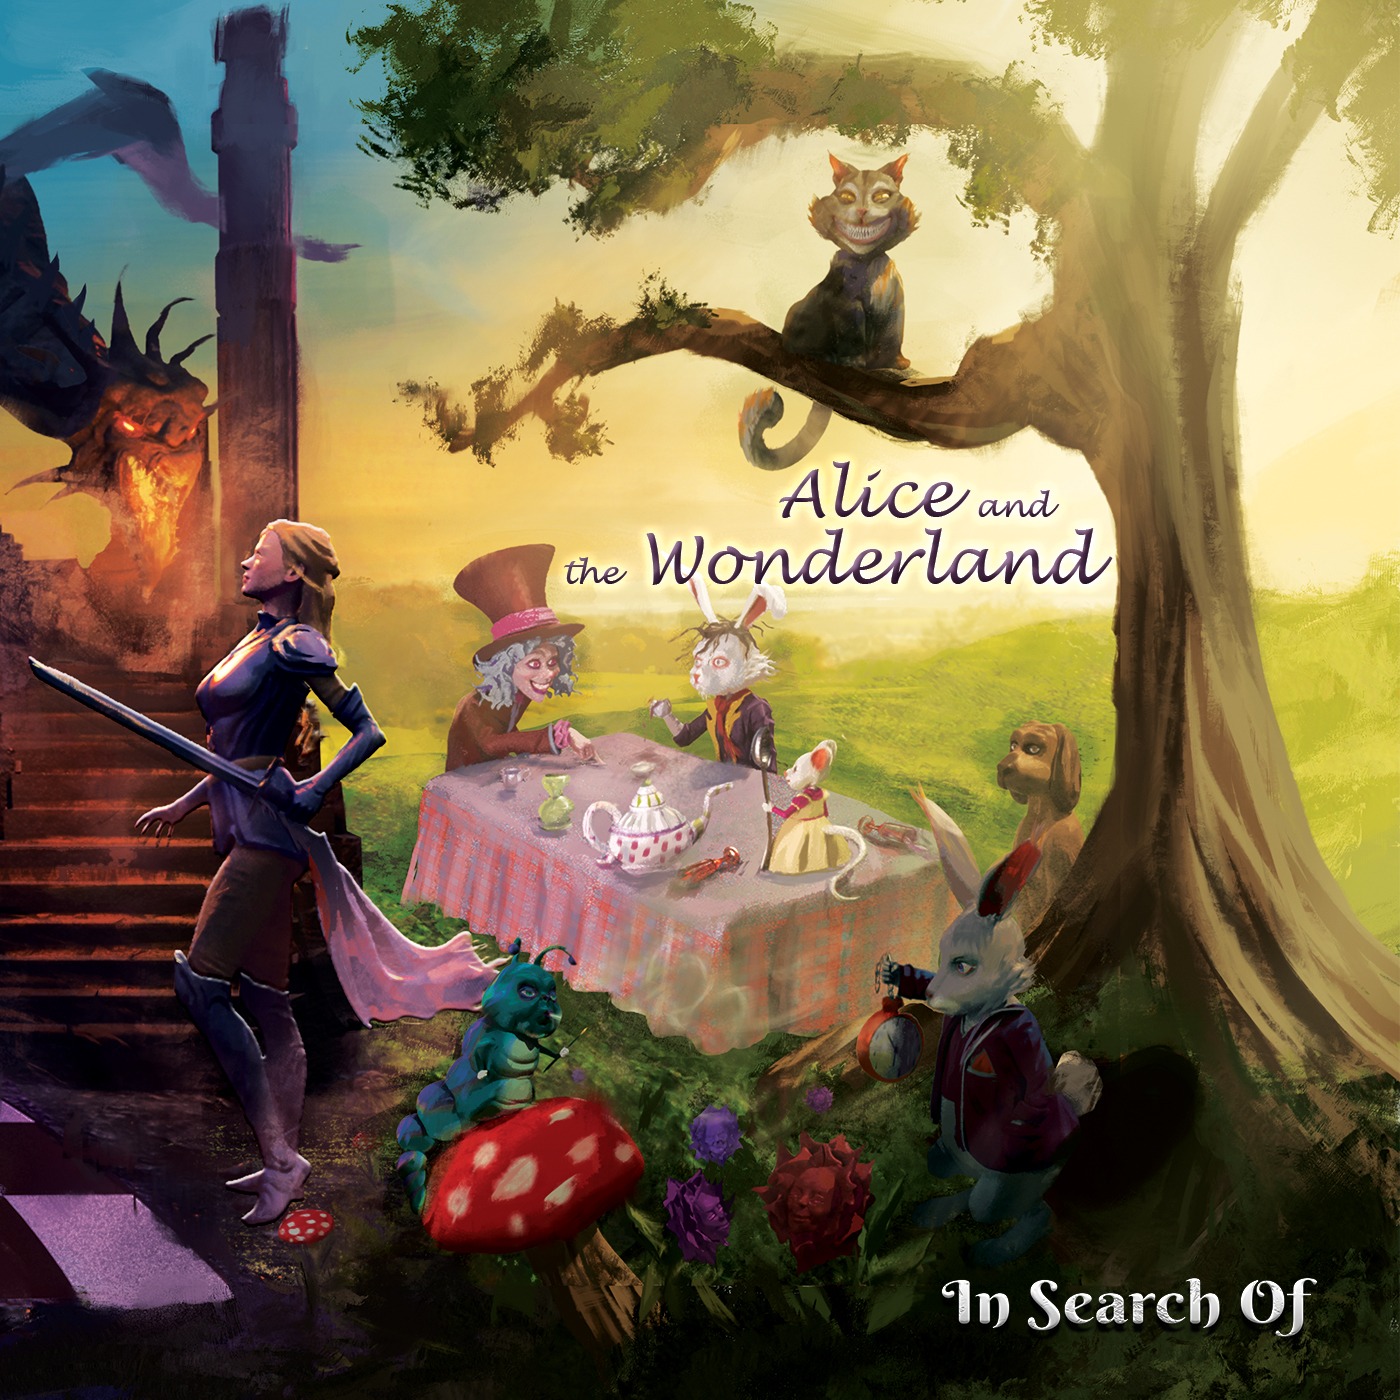 An Amusing, Inspiring, & Magical Journey of Alice through Wonderland - In Search Of’s Emotional Debut Album Mesmerizes All